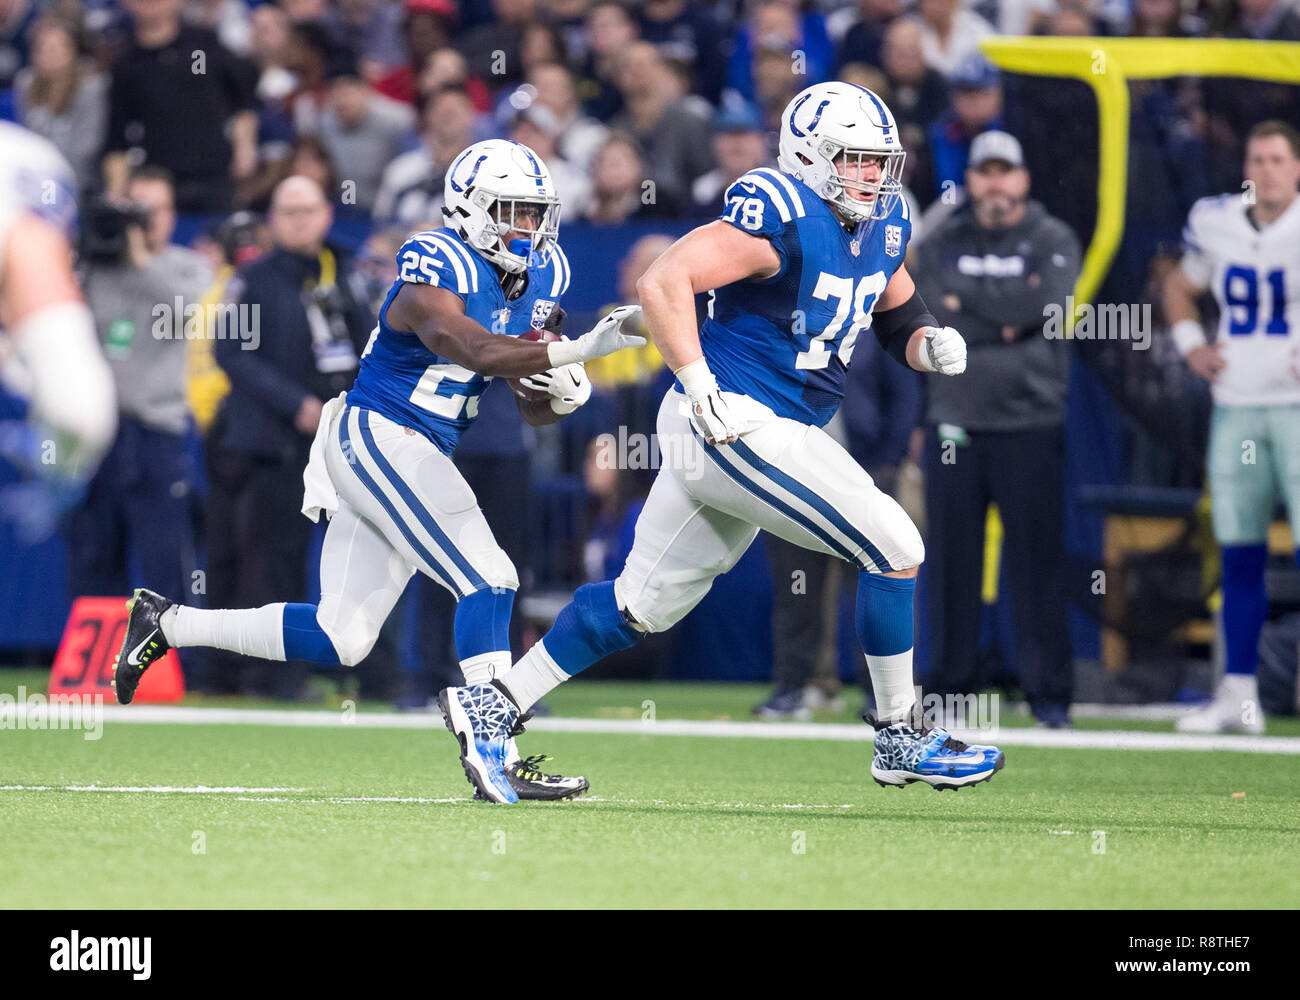 Indianapolis, Indiana, USA. 16th Dec, 2018. Indianapolis Colts center Ryan Kelly (78) lead blocks for Indianapolis Colts running back Marlon Mack (25) during NFL football game action between the Dallas Cowboys and the Indianapolis Colts at Lucas Oil Stadium in Indianapolis, Indiana. Indianapolis defeated Dallas 23-0. John Mersits/CSM/Alamy Live News Stock Photo